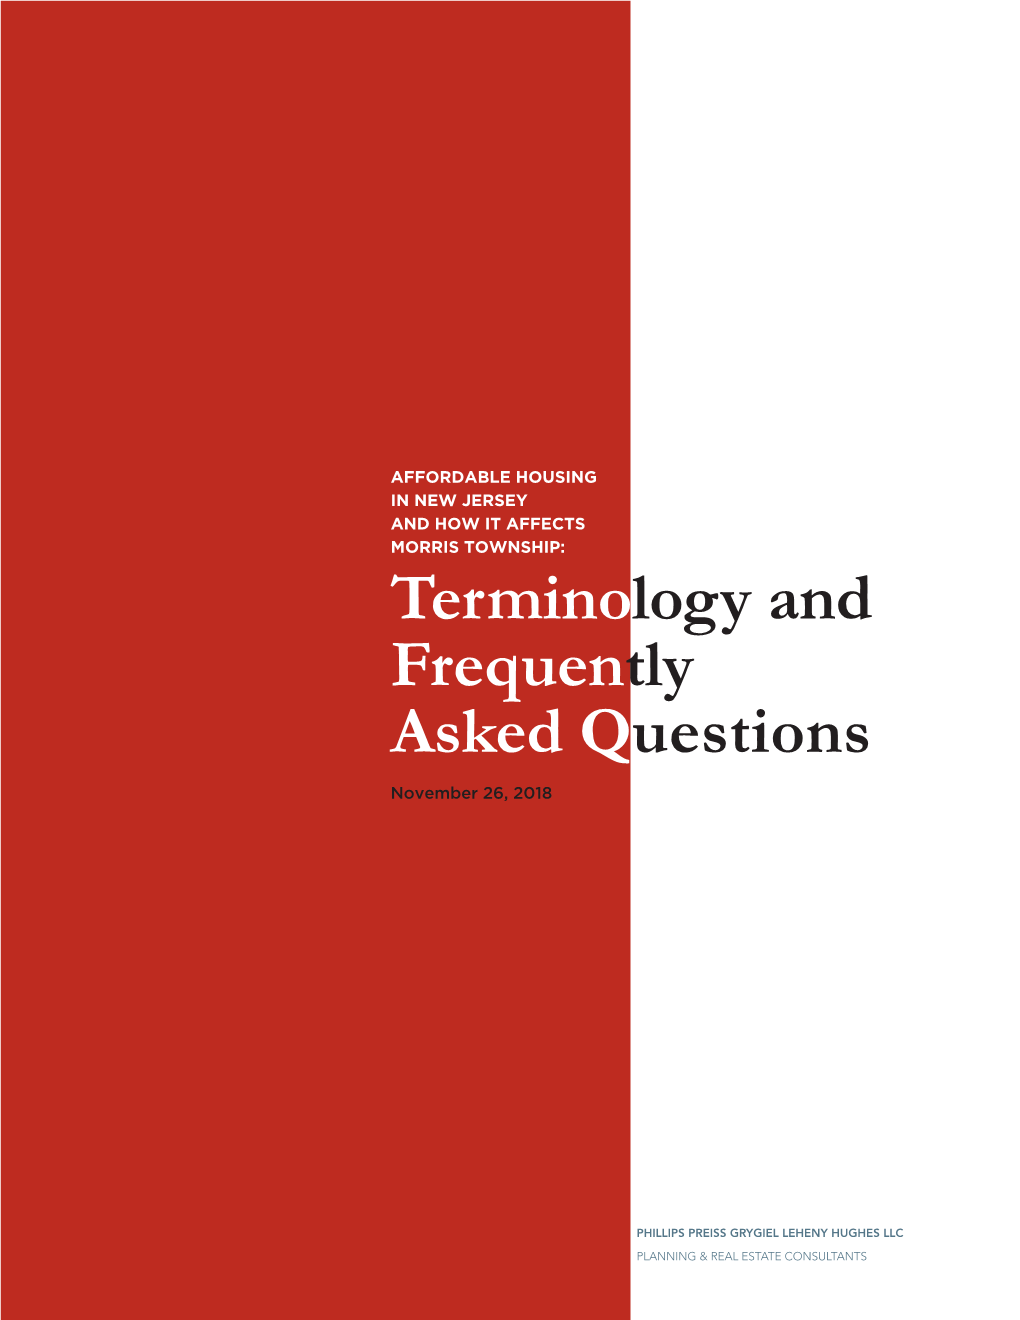 Terminology and Frequently Asked Questions From